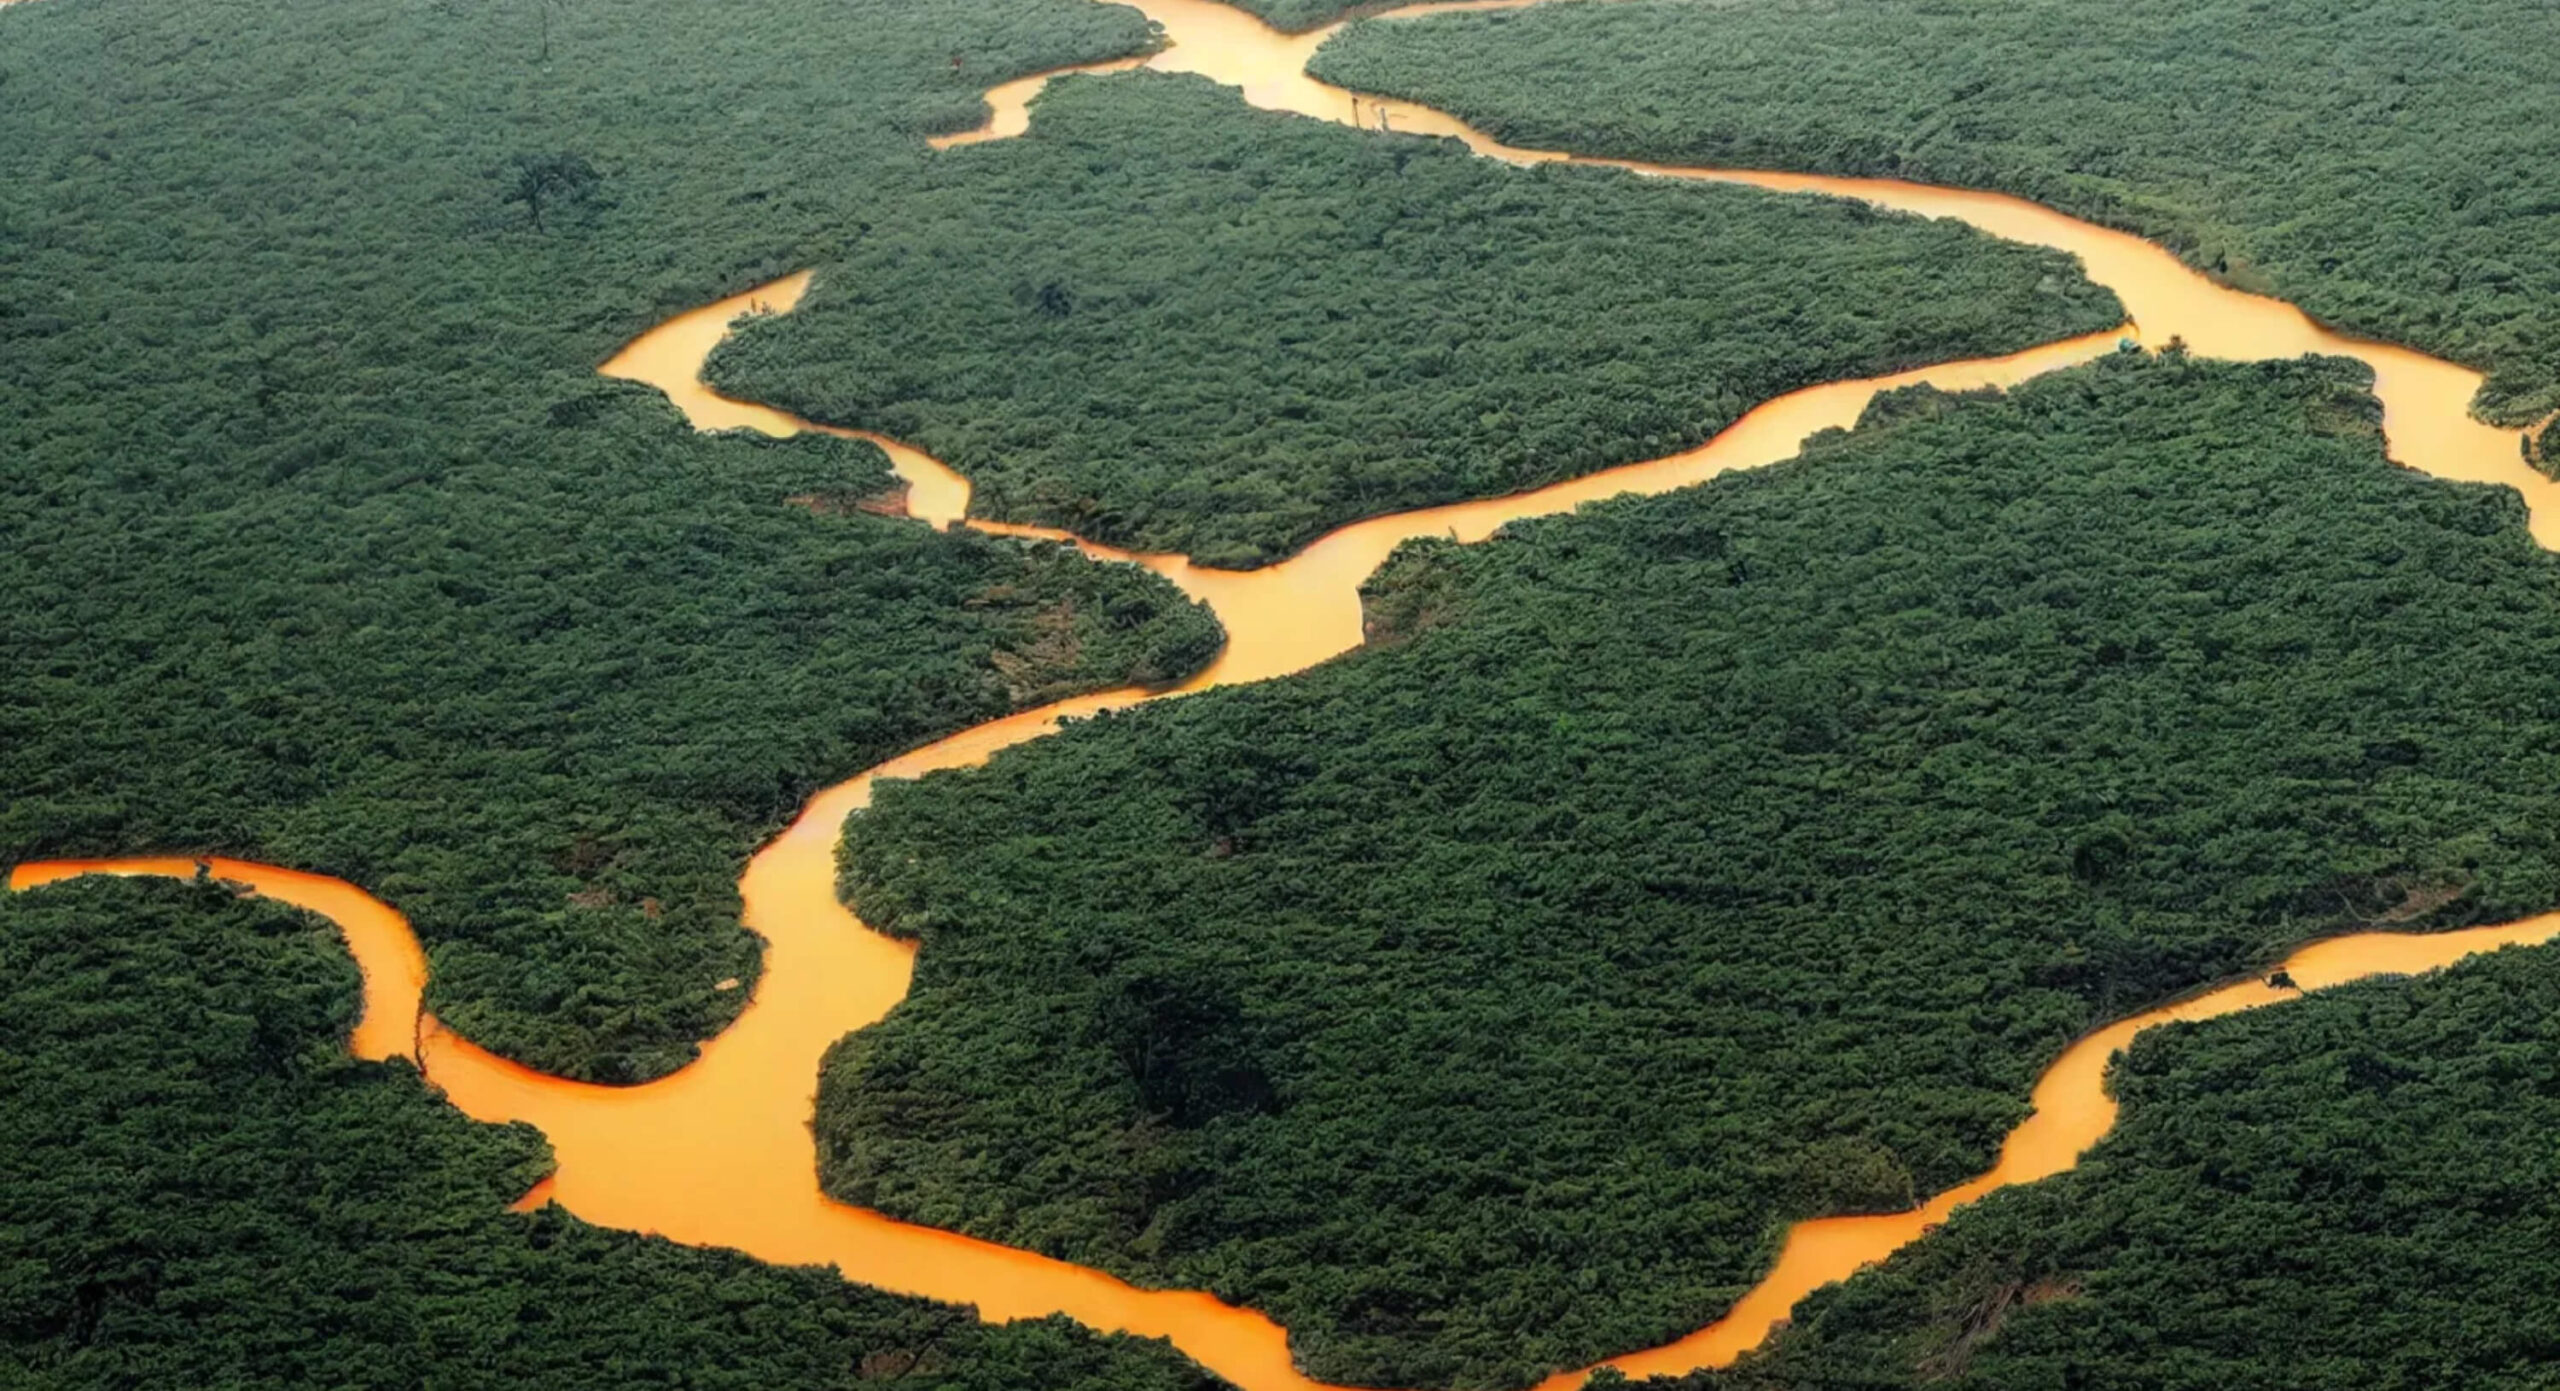 Featured image for “Tropical forests struggling to recover from deforestation, new research shows”